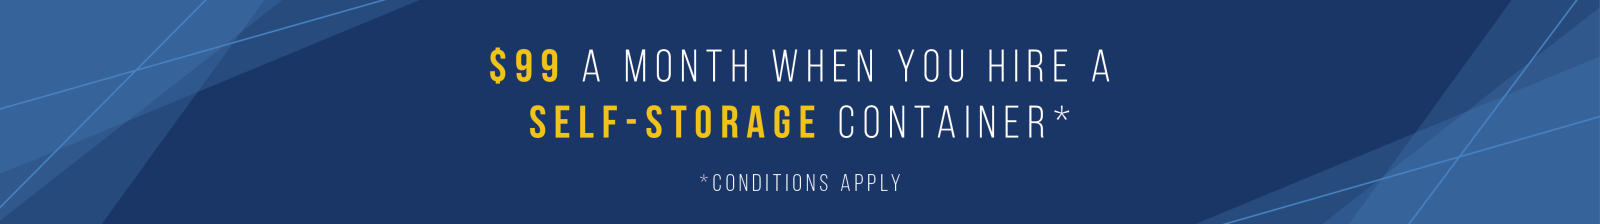 $99 a month when you hire a Self-Storage container. Conditions apply.